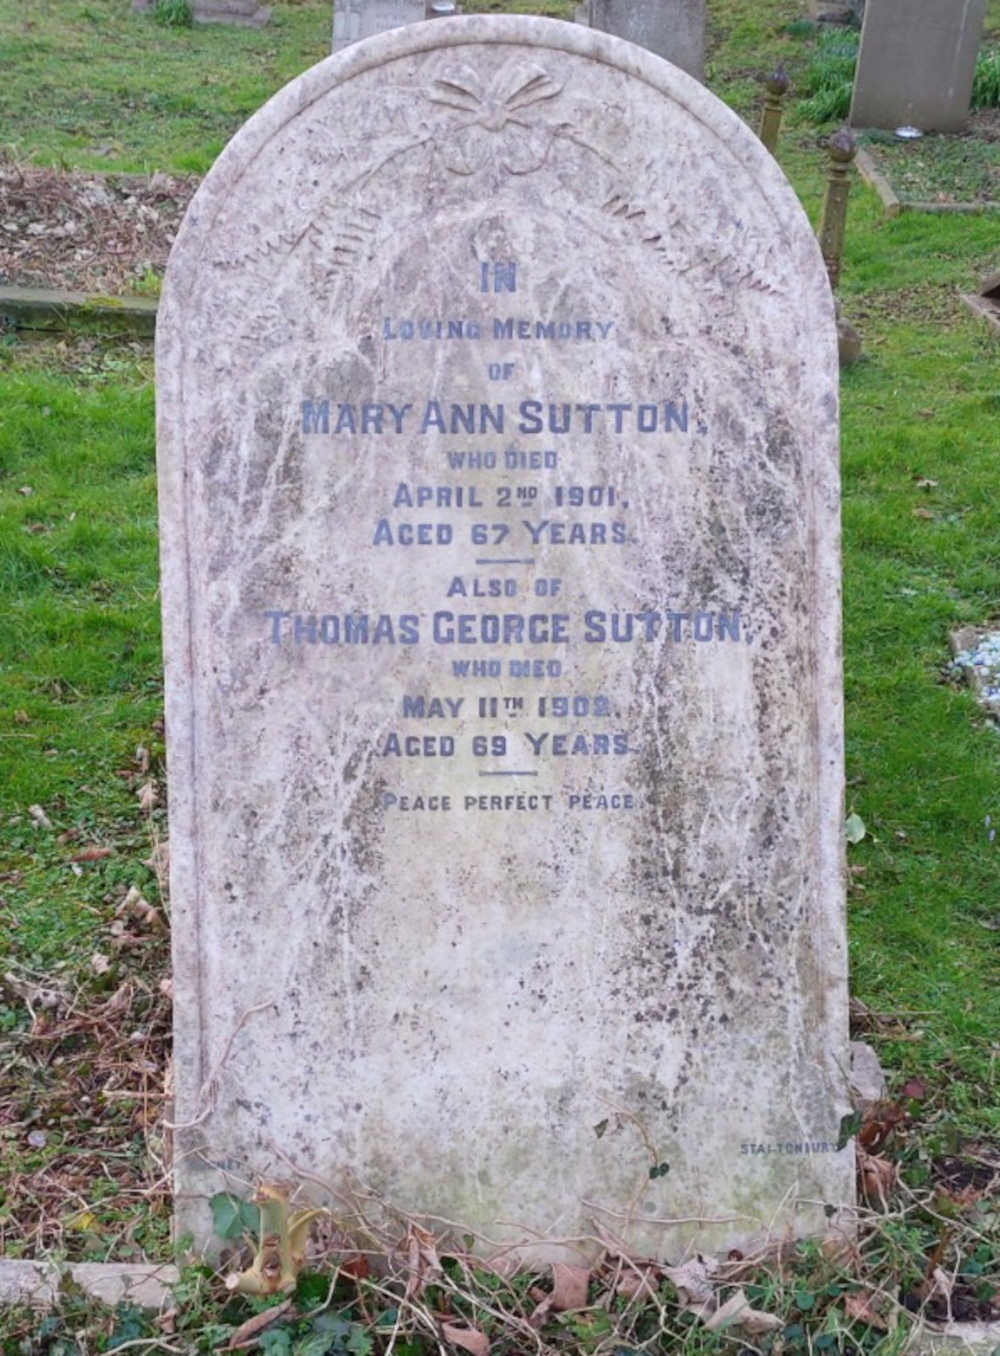 Gravestone St Andrews Churchyard Great Linford Mary and Thomas Sutton